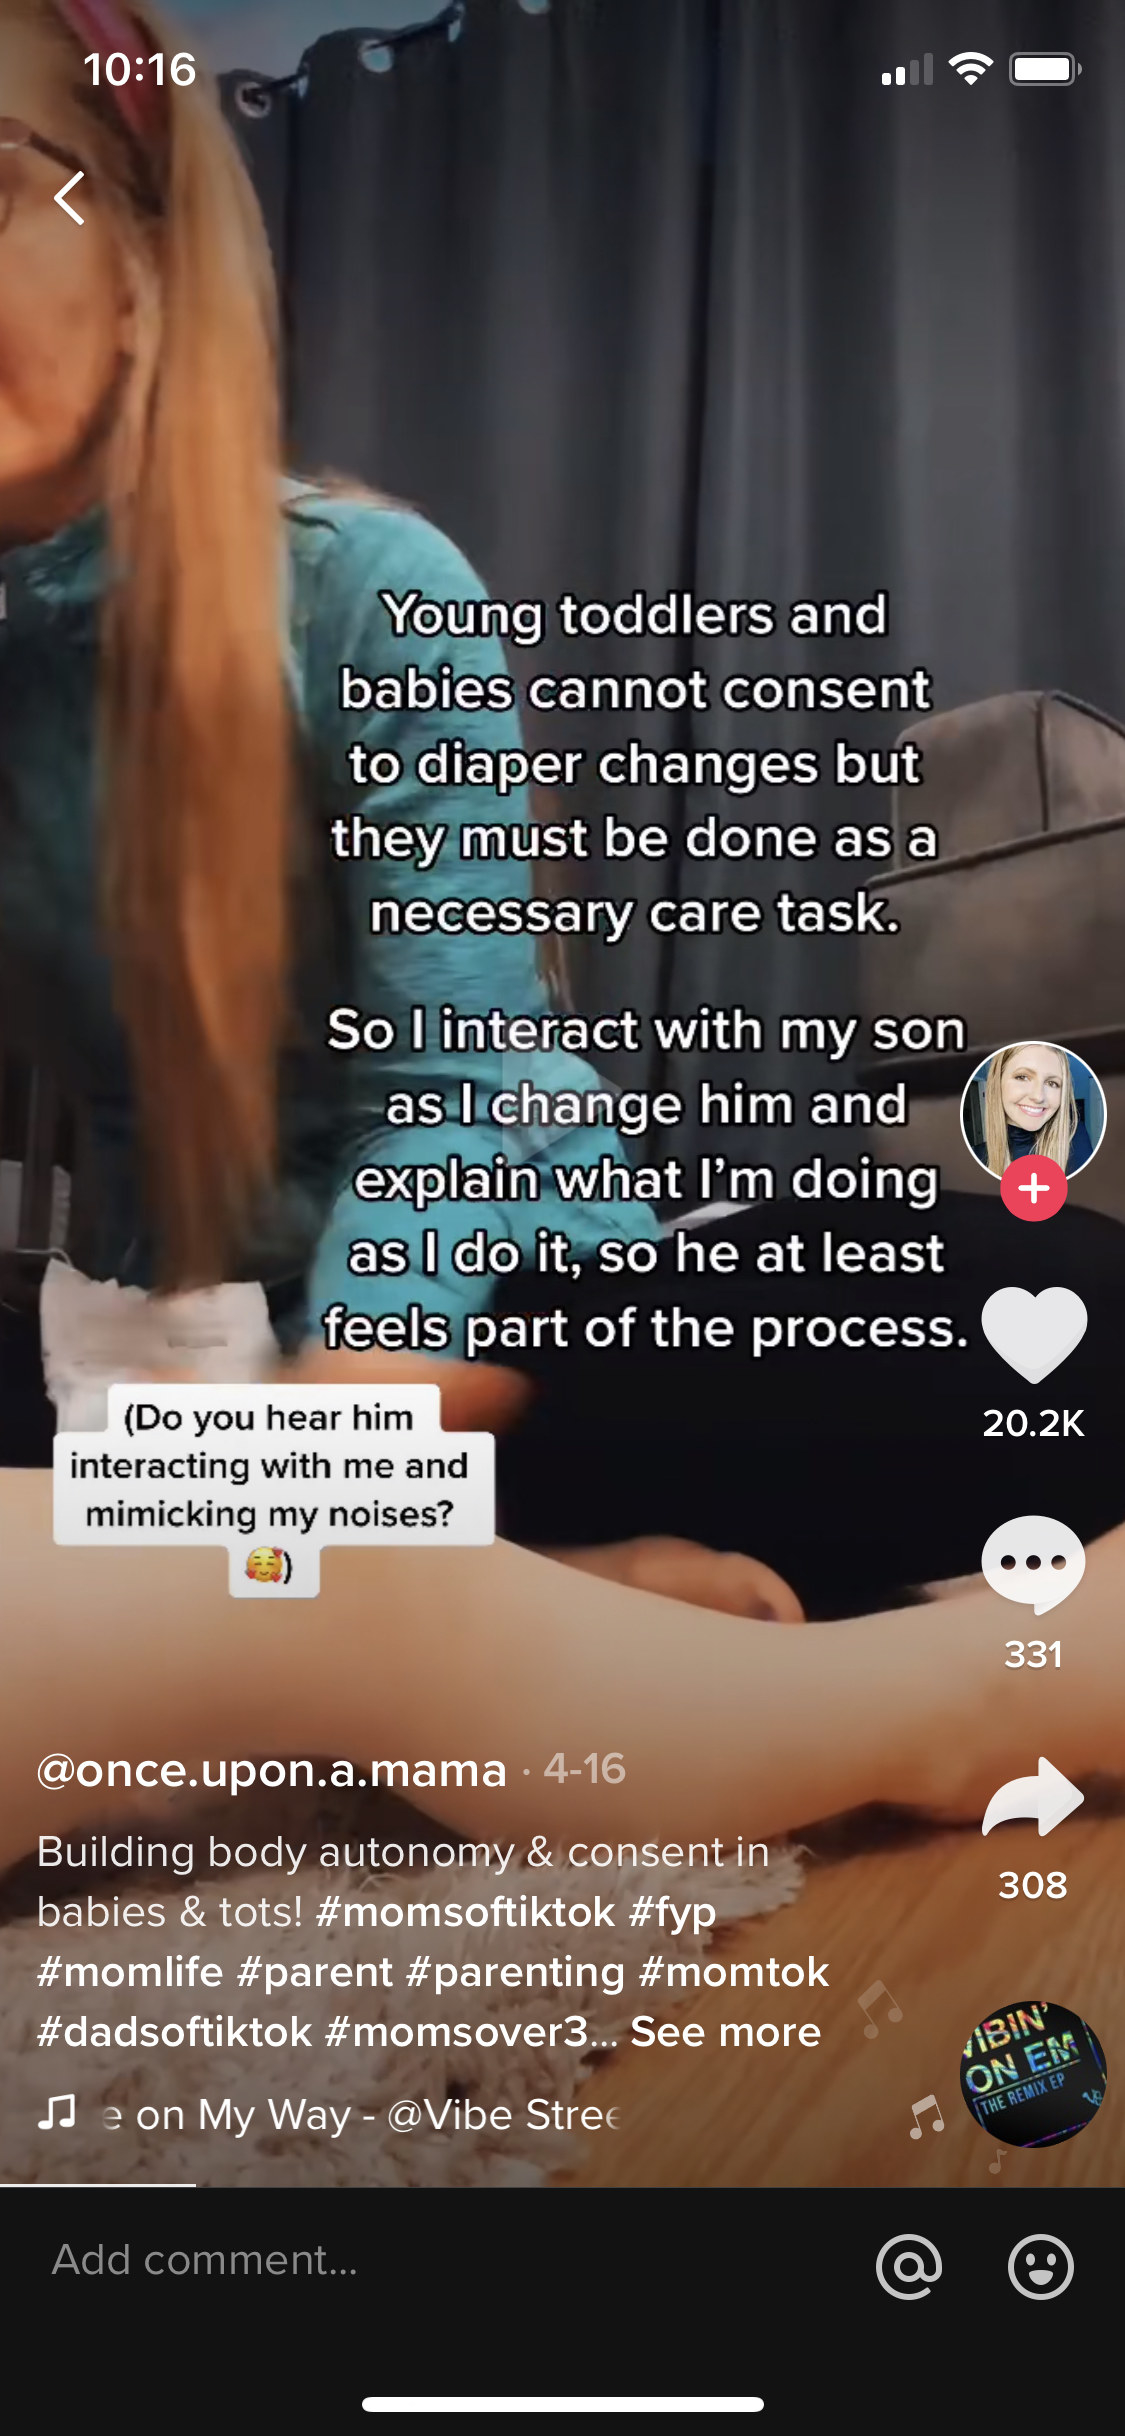 Alissa explaining that although young toddlers cannot consent to having their diapers changed, it&#x27;s still necessary, so she explains what she&#x27;s doing so he at least feels like he&#x27;s a part of the process